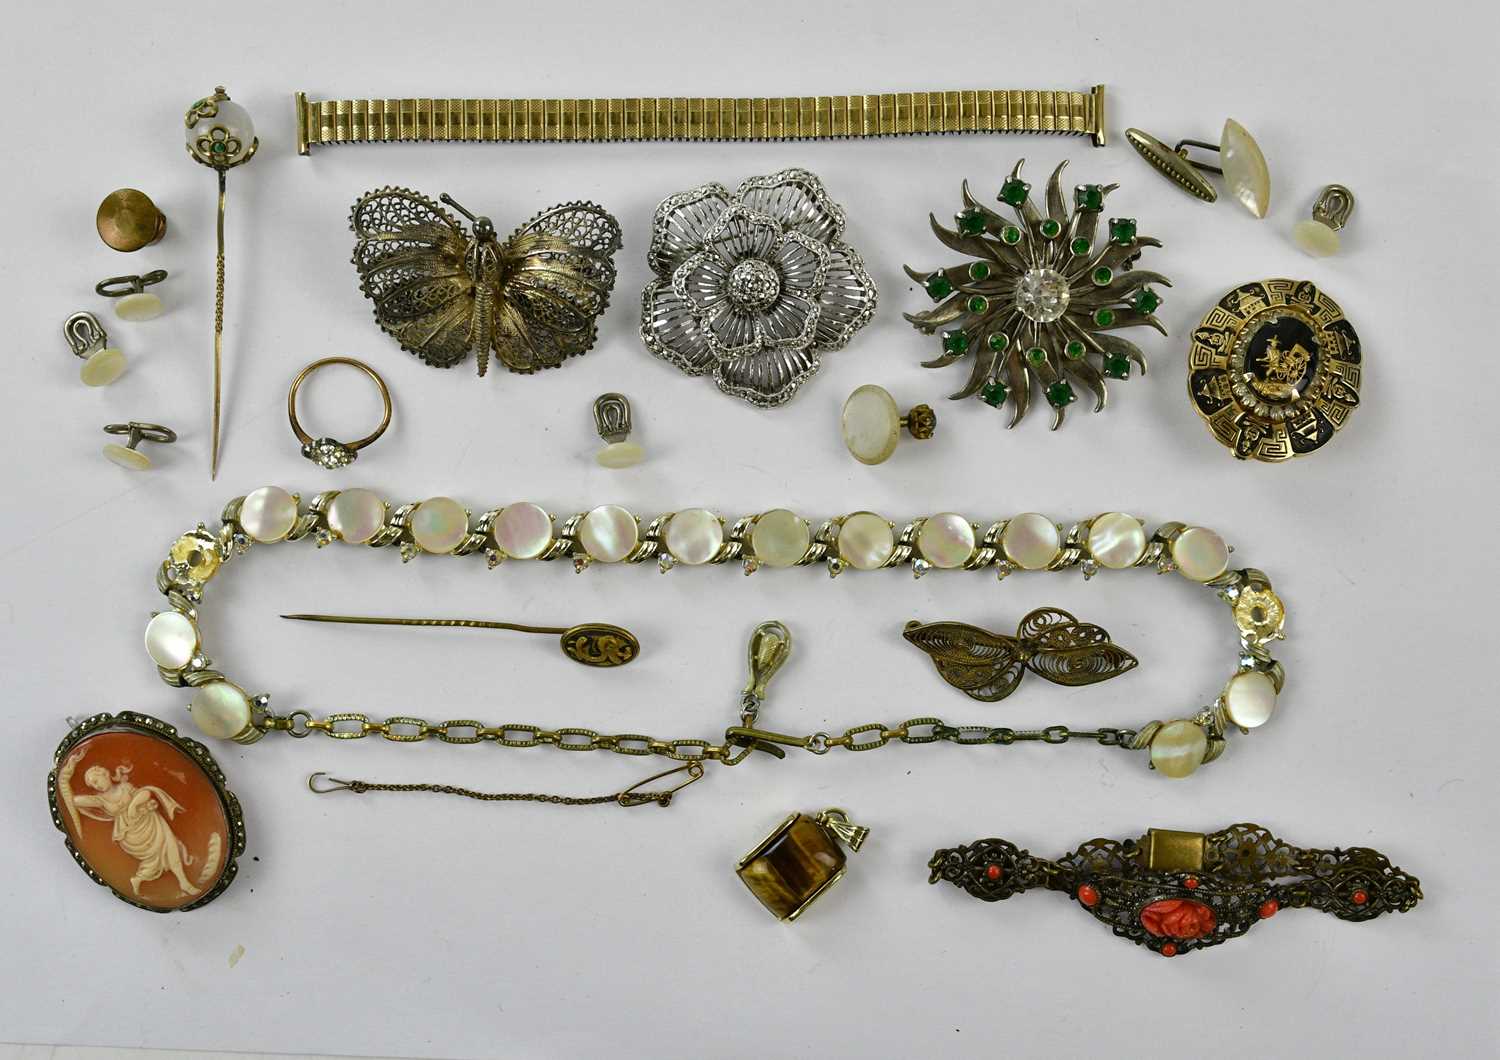 A small group of costume jewellery including filigree butterfly or insect brooch, stylish floral